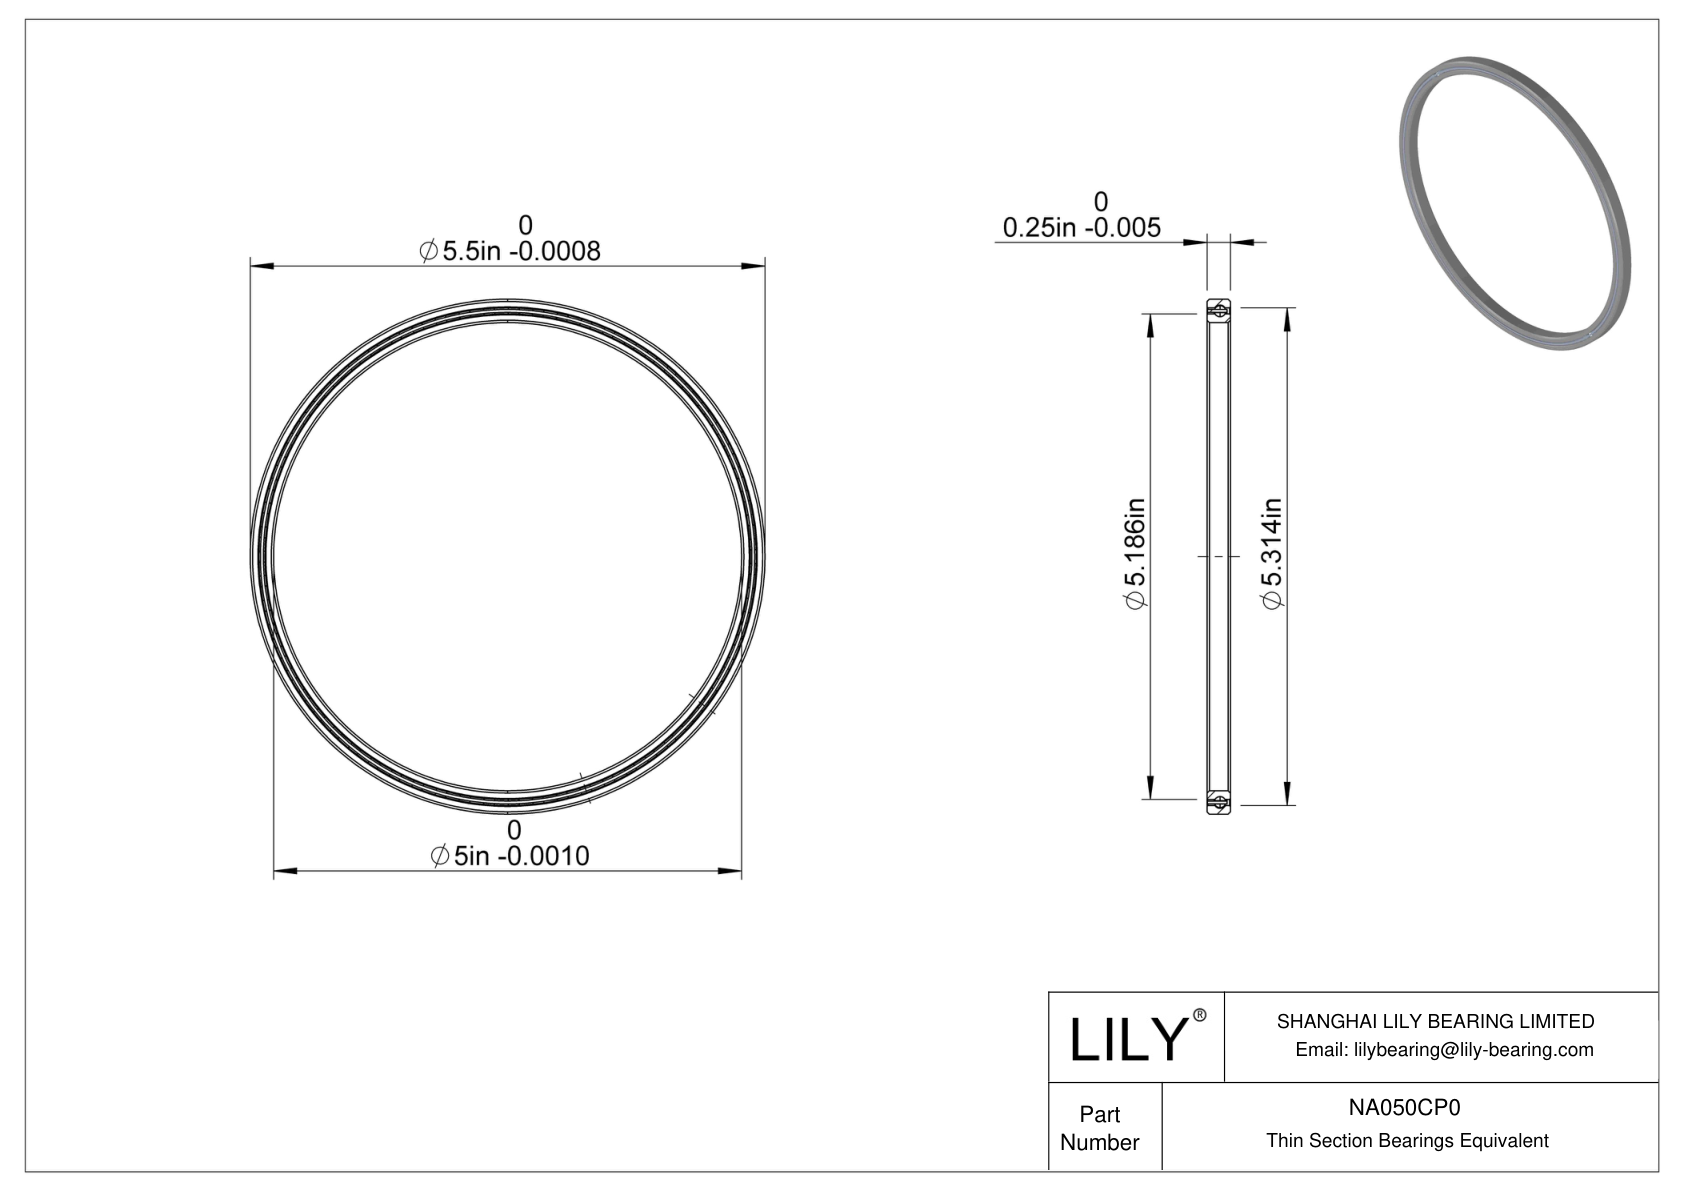 NA050CP0 Constant Section (CS) Bearings cad drawing